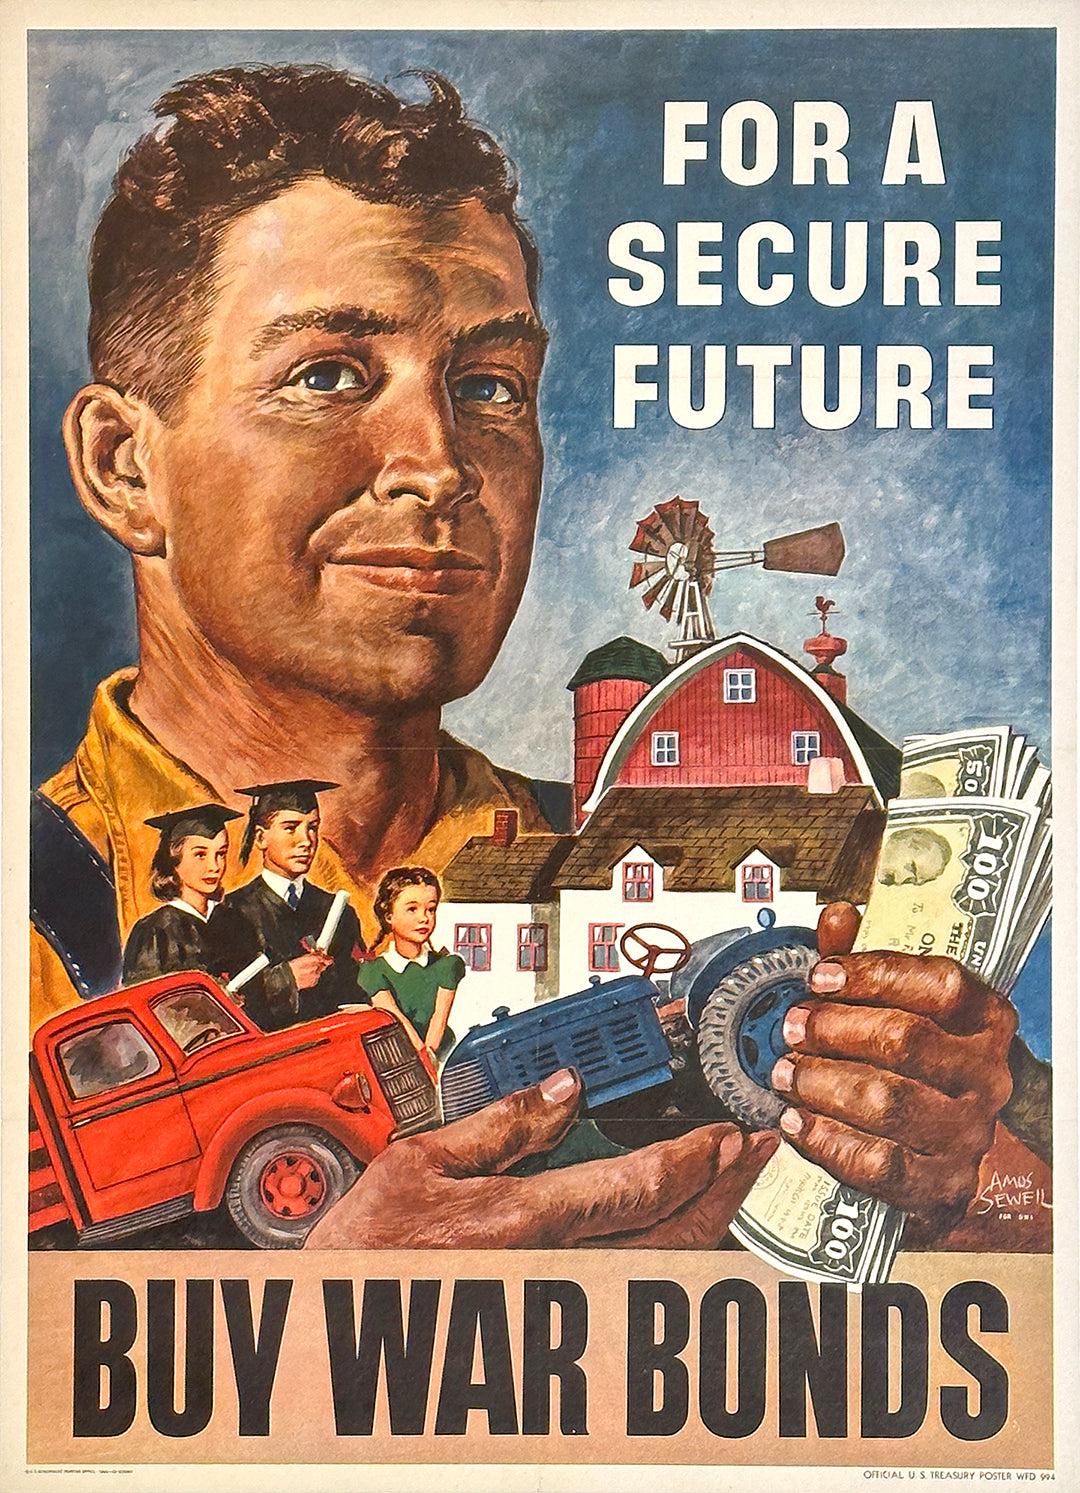 Original Vintage WWII Poster Buy War Bonds for A Secure Future by Amos Sewell